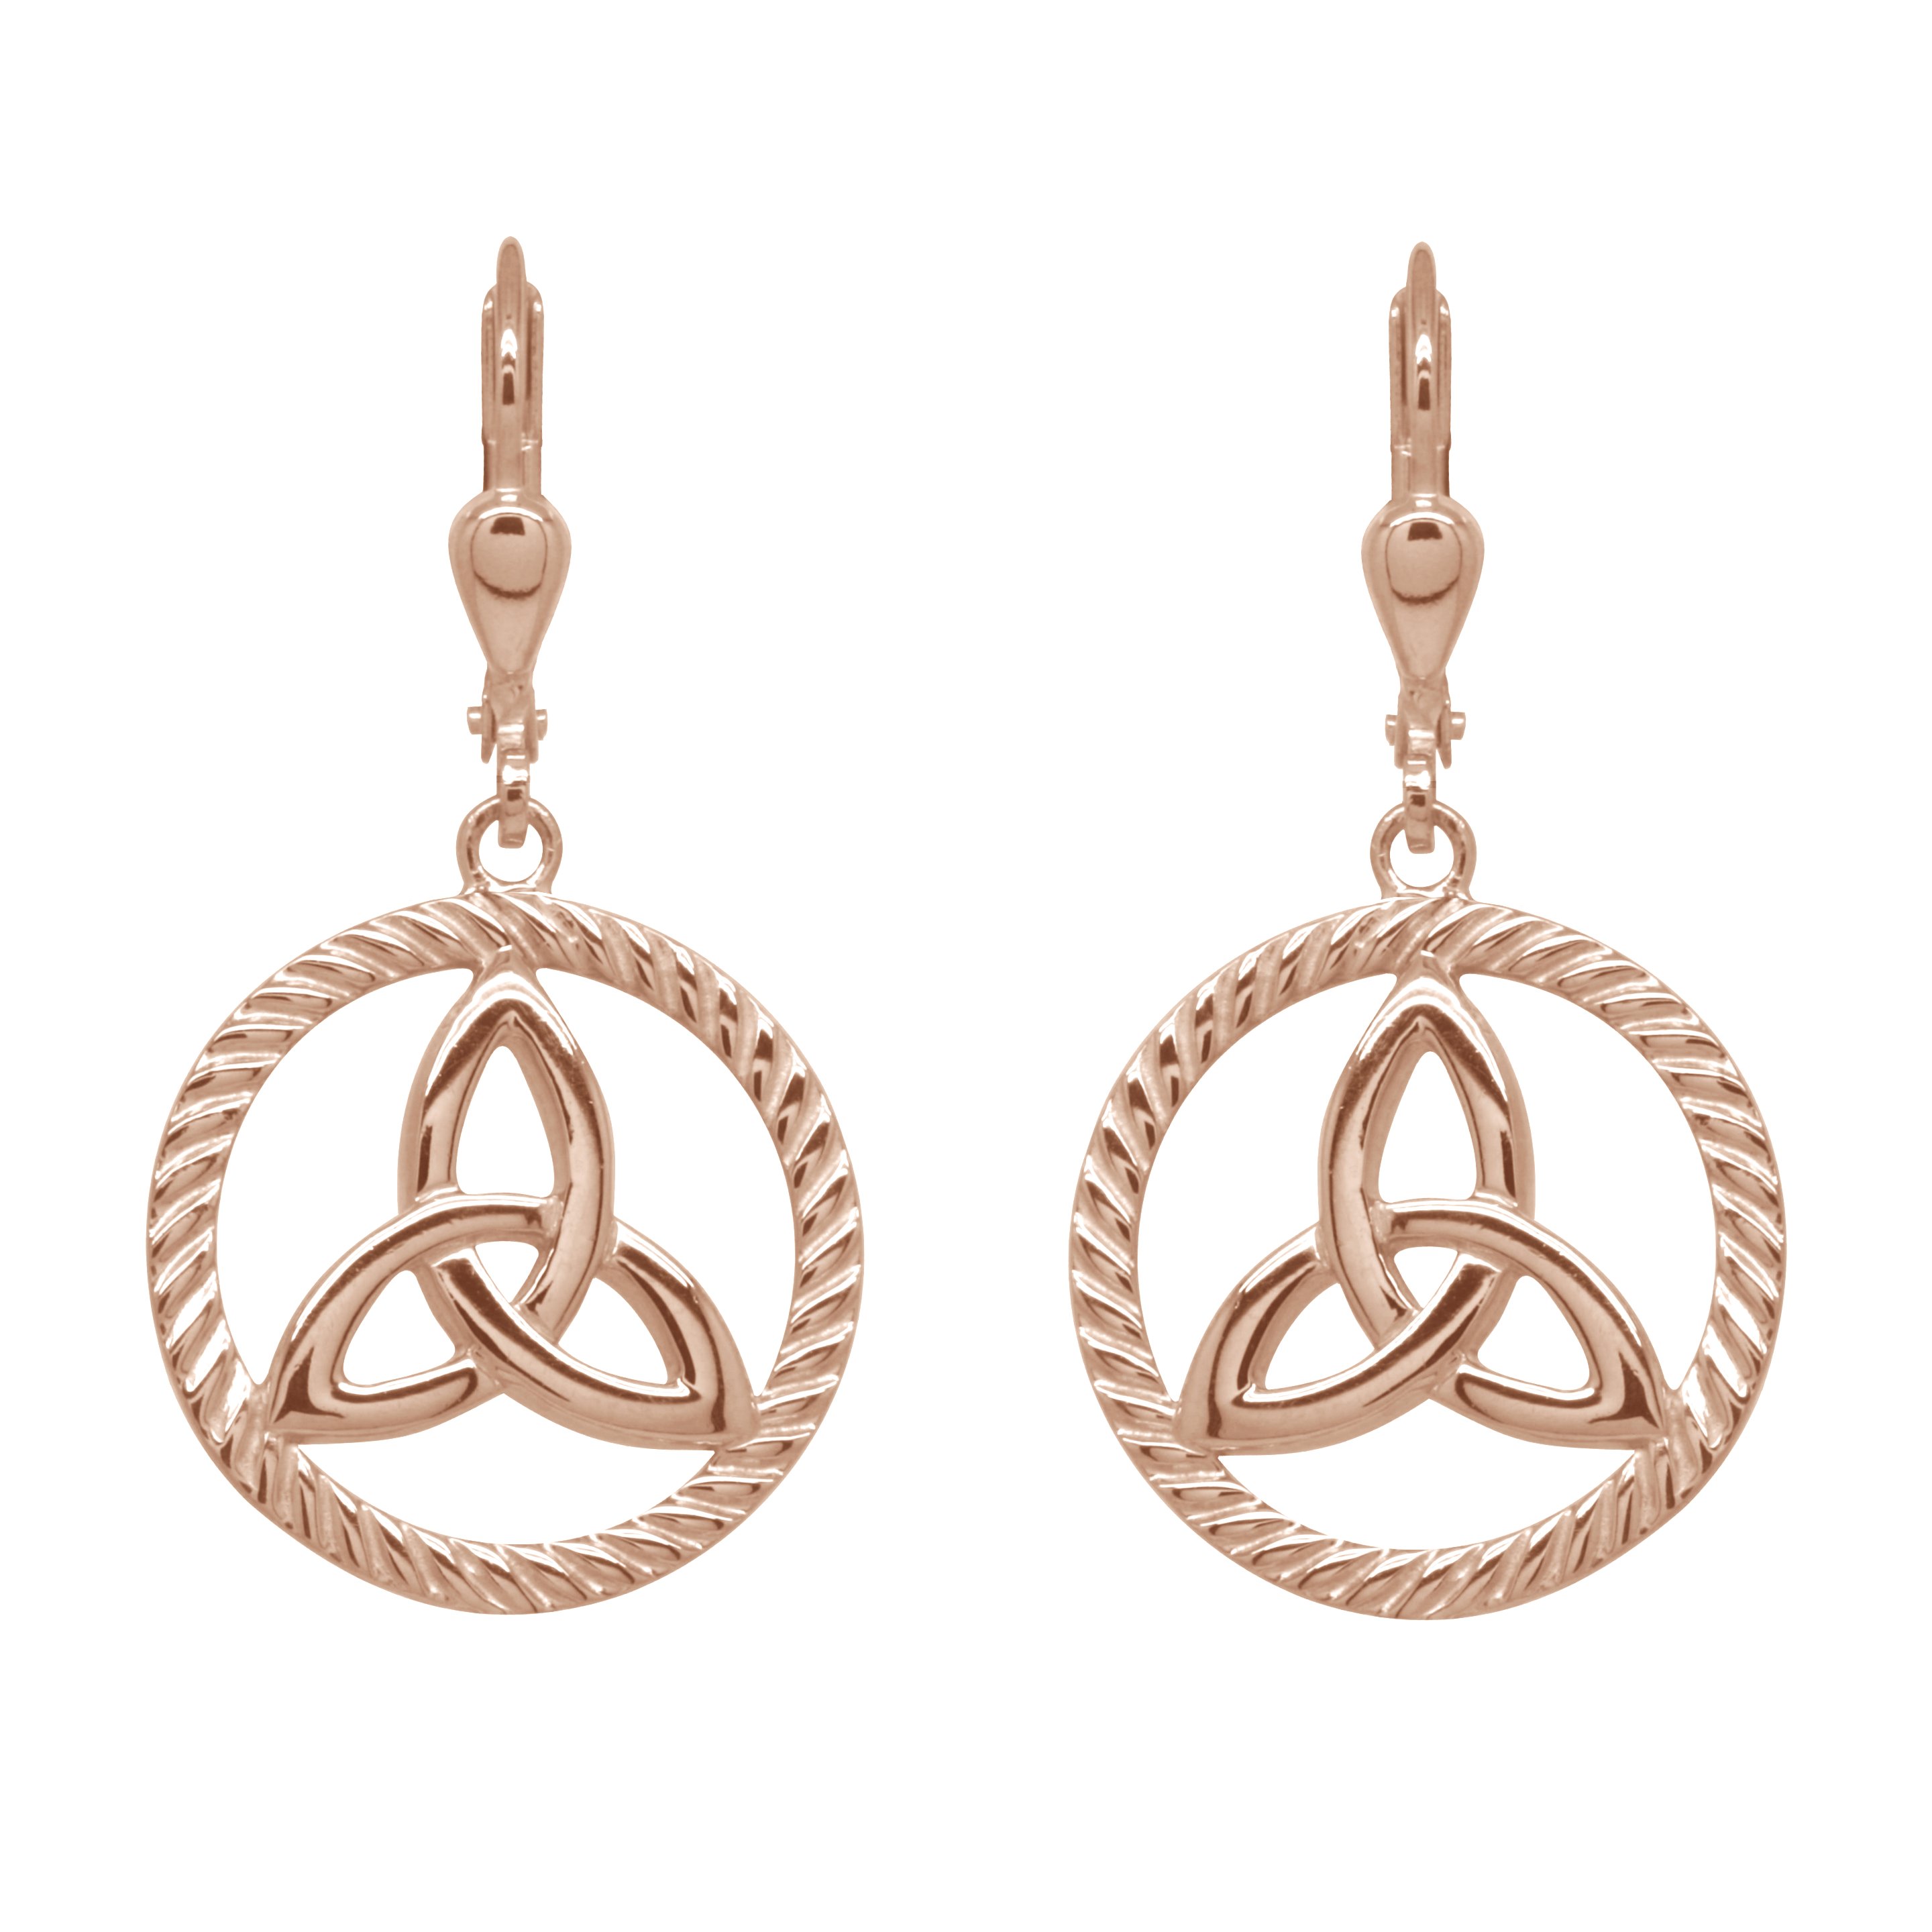 Product image for Irish Earrings | Rose Gold Plated Sterling Silver Round Trinity Knot Earrings